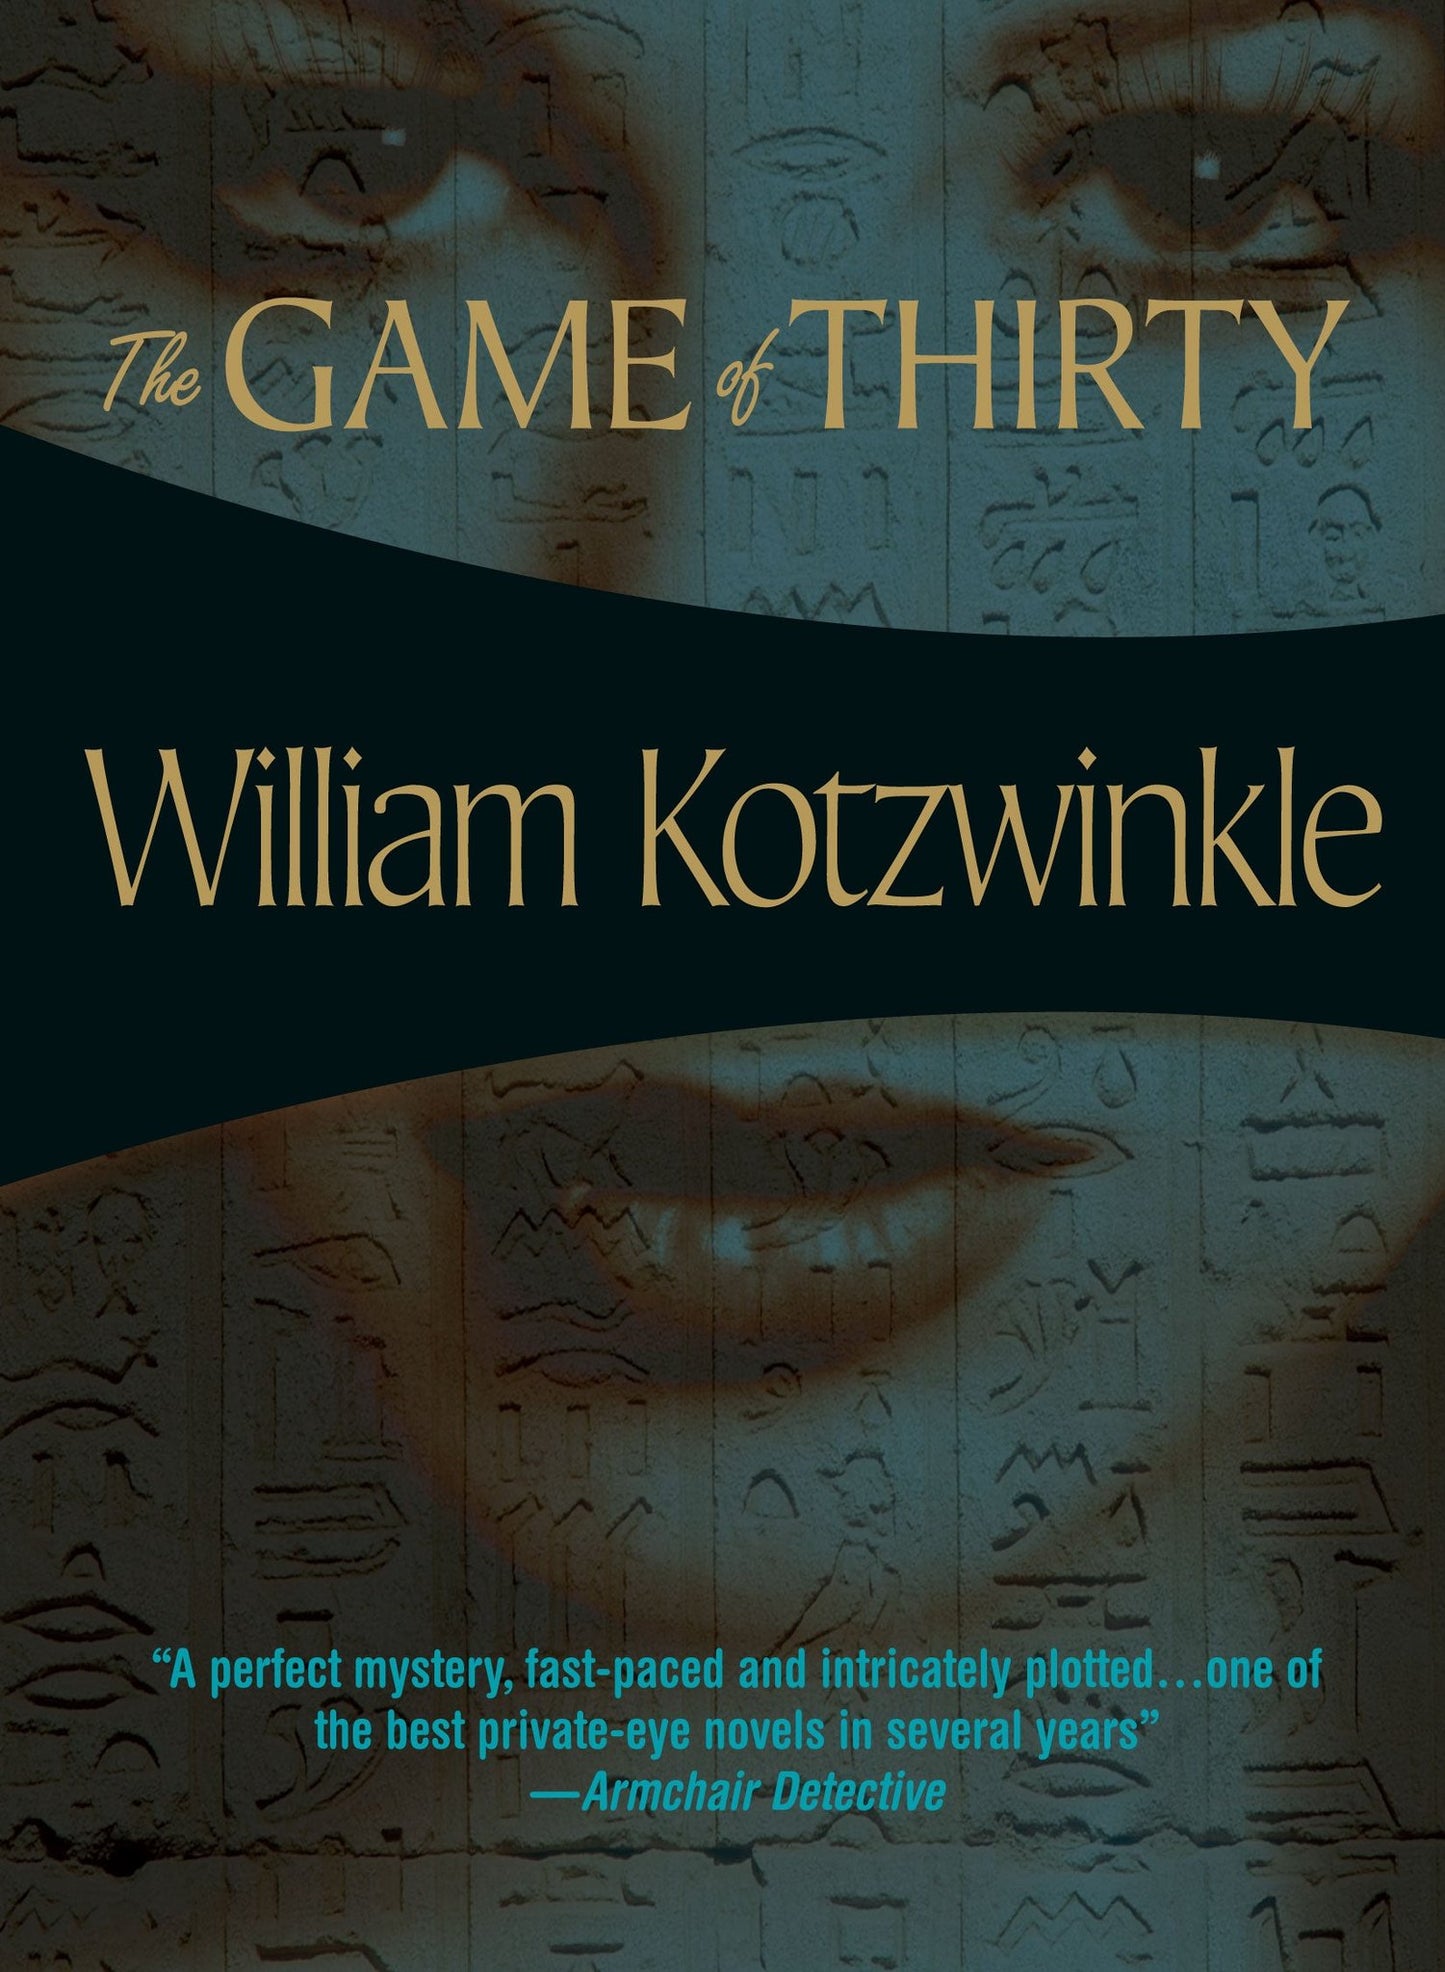 The Game of Thirty by William Kotzwinkle